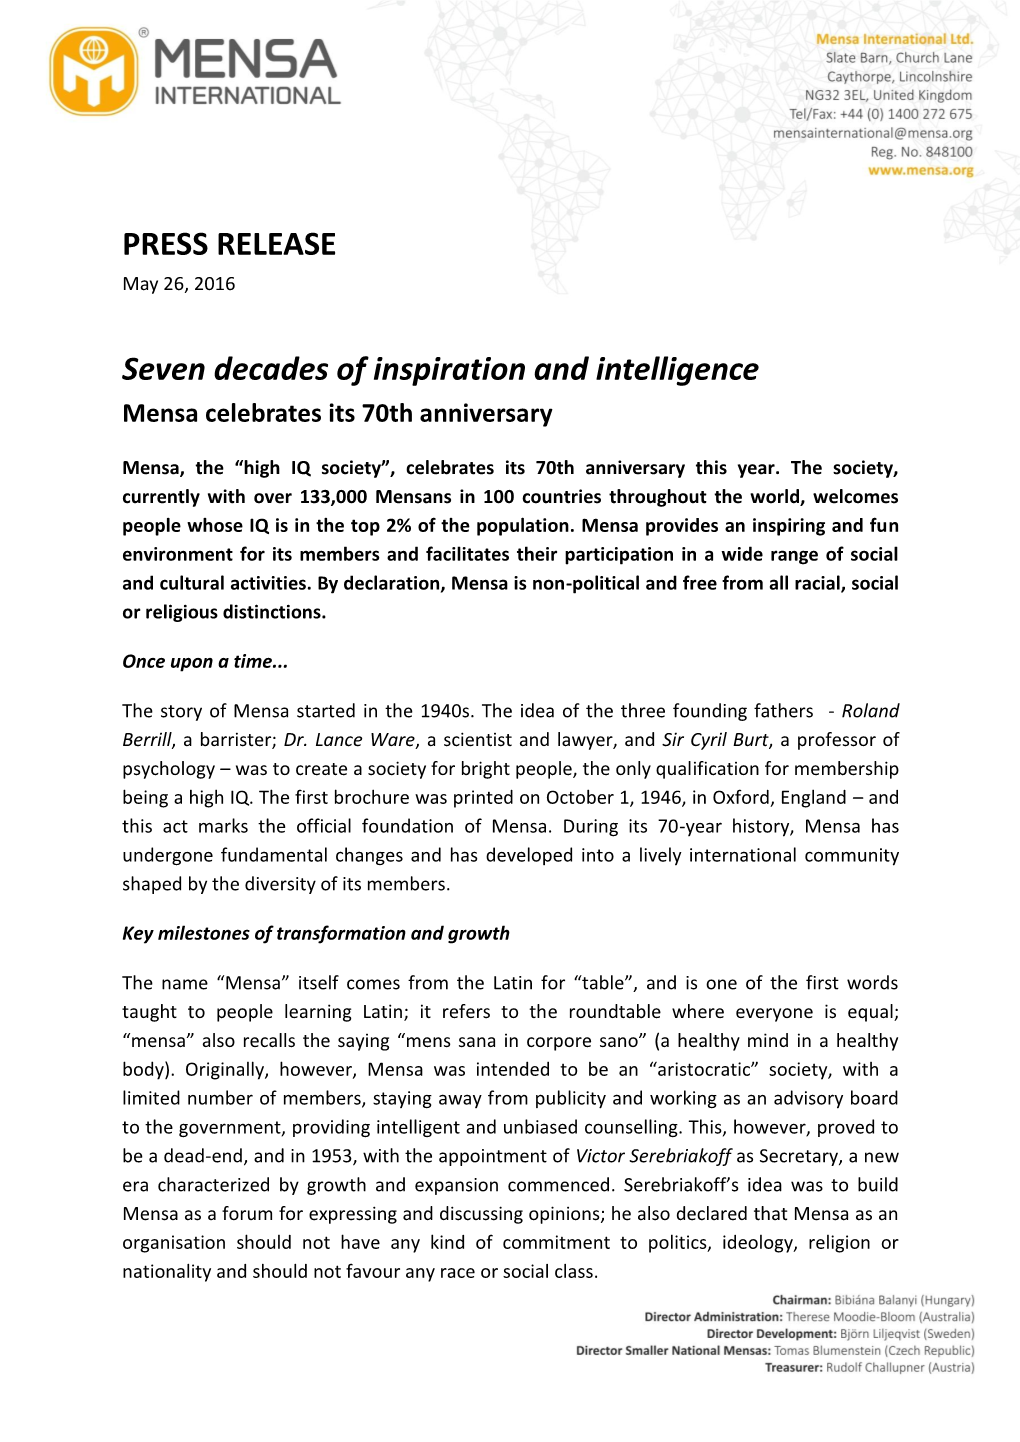 PRESS RELEASE Seven Decades of Inspiration and Intelligence